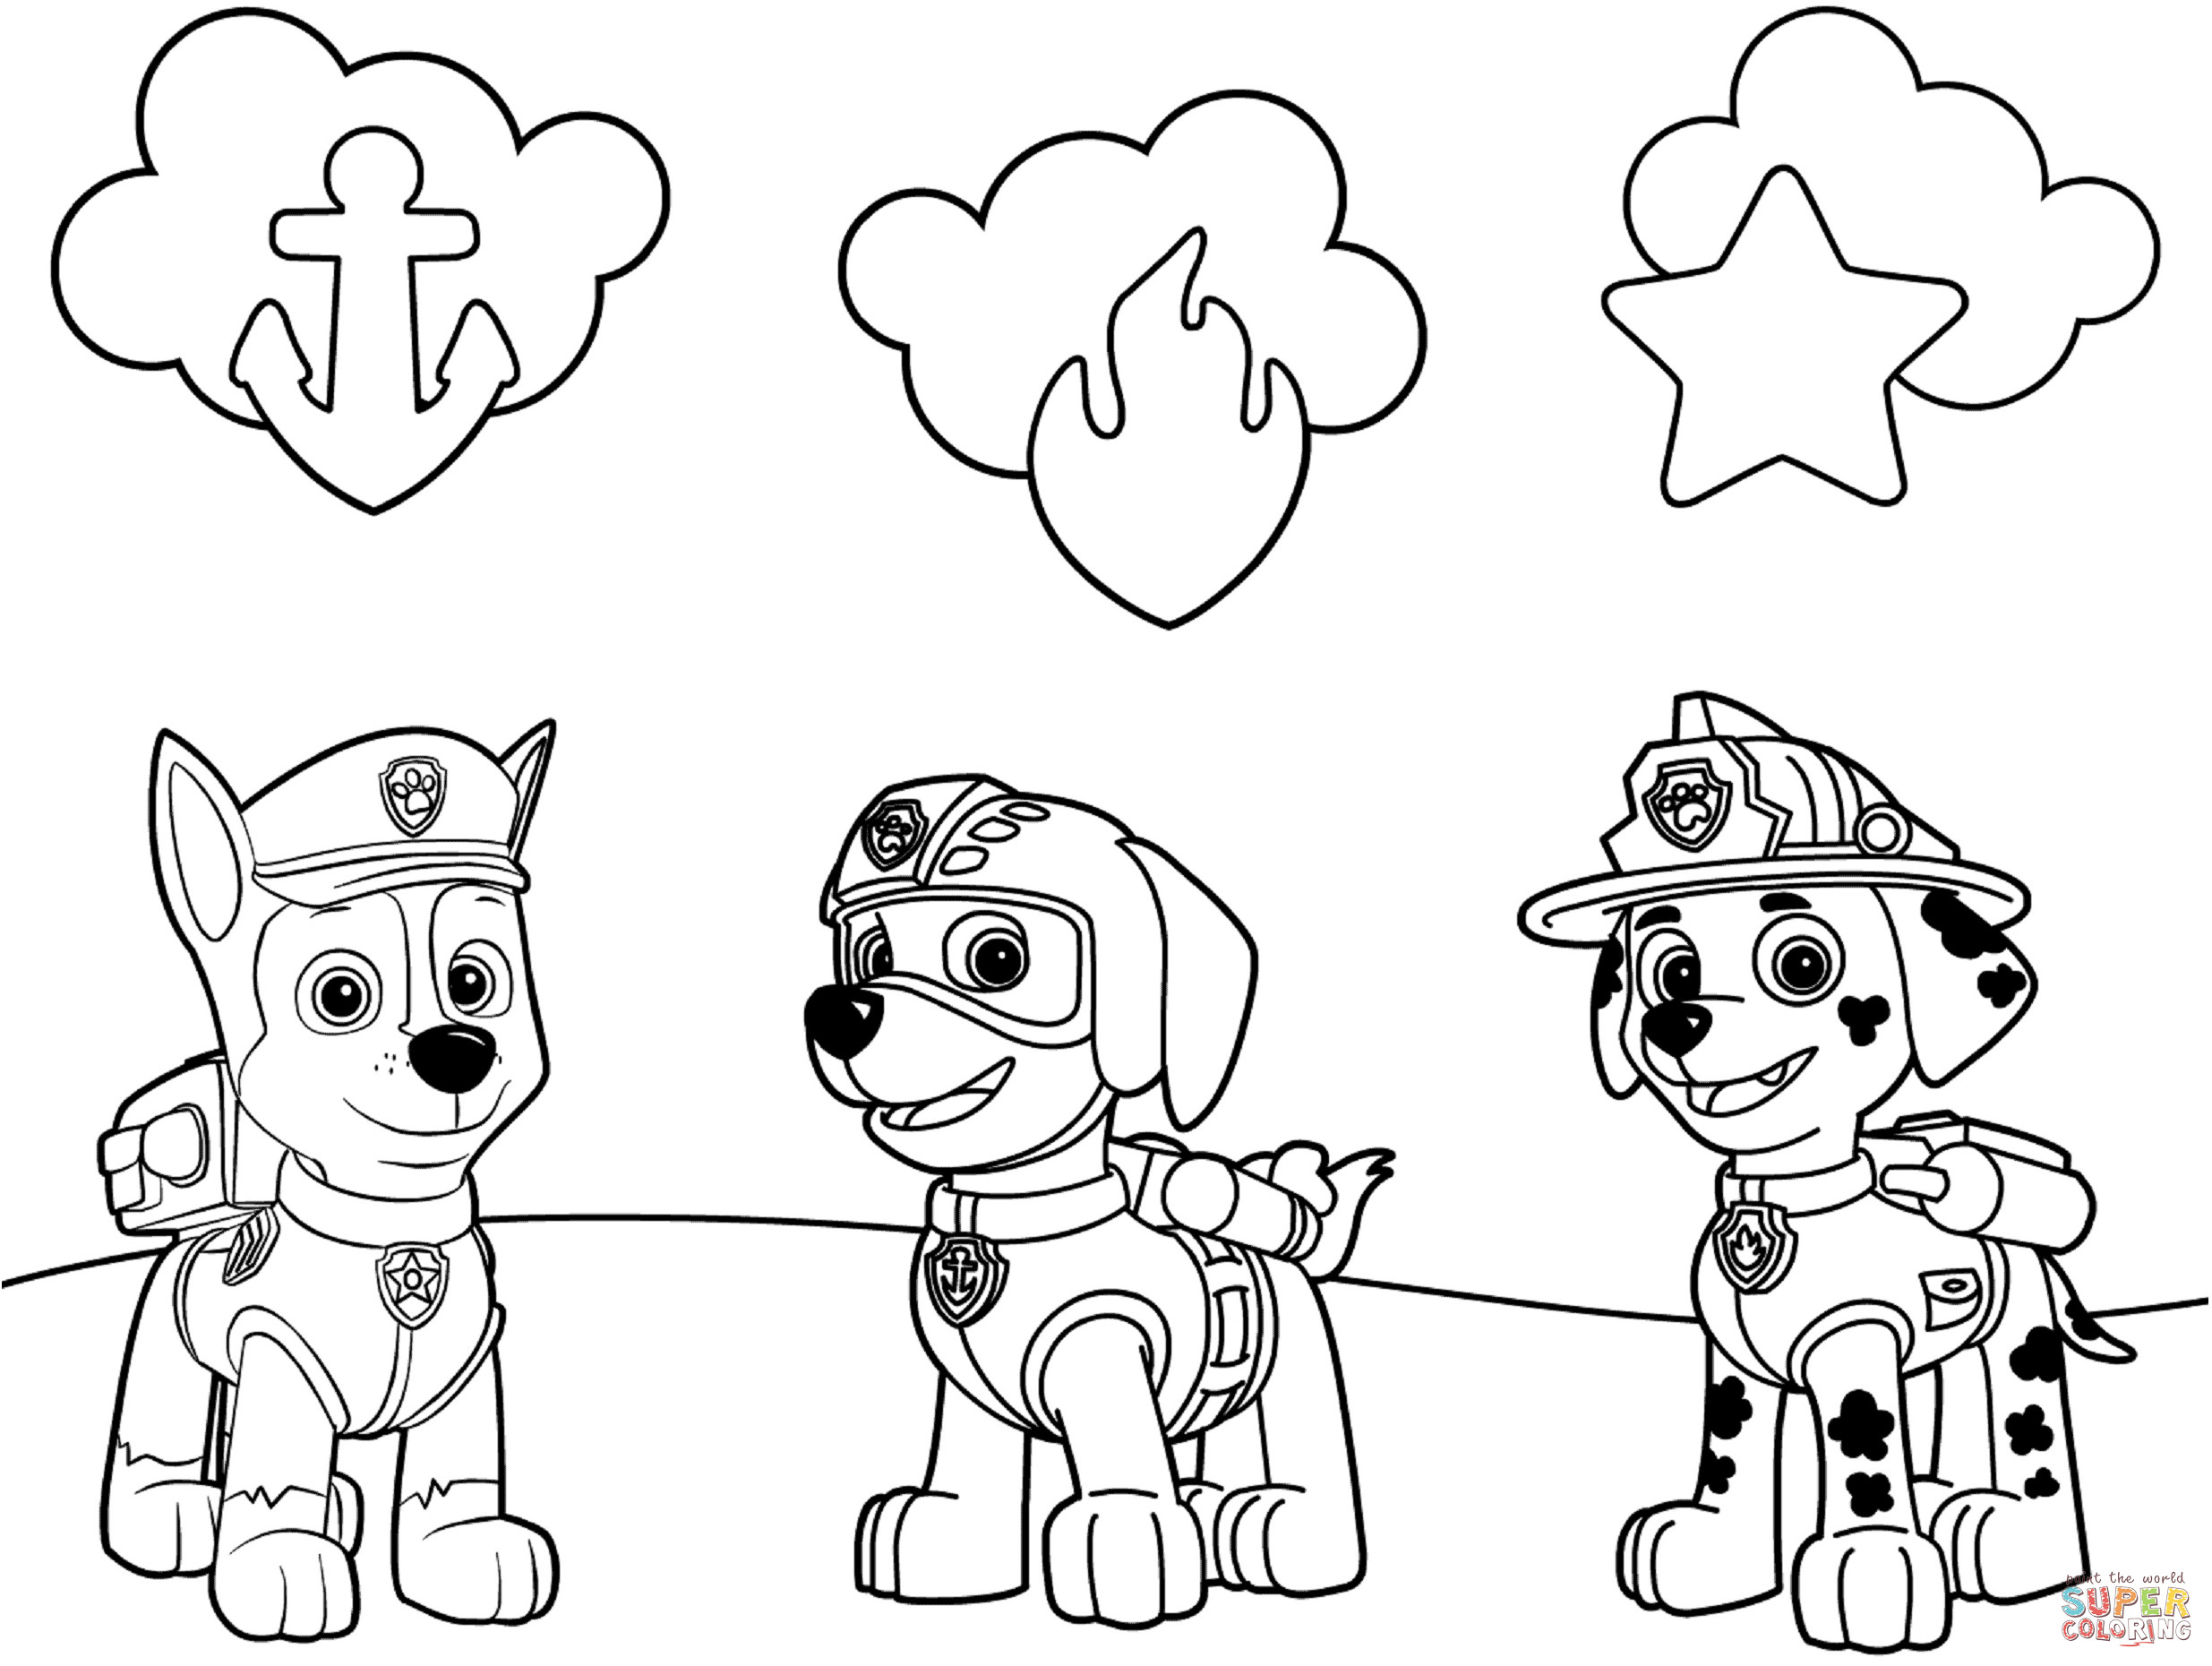 Printable Coloring Pages Paw Patrol
 Paw Patrol Badges coloring page